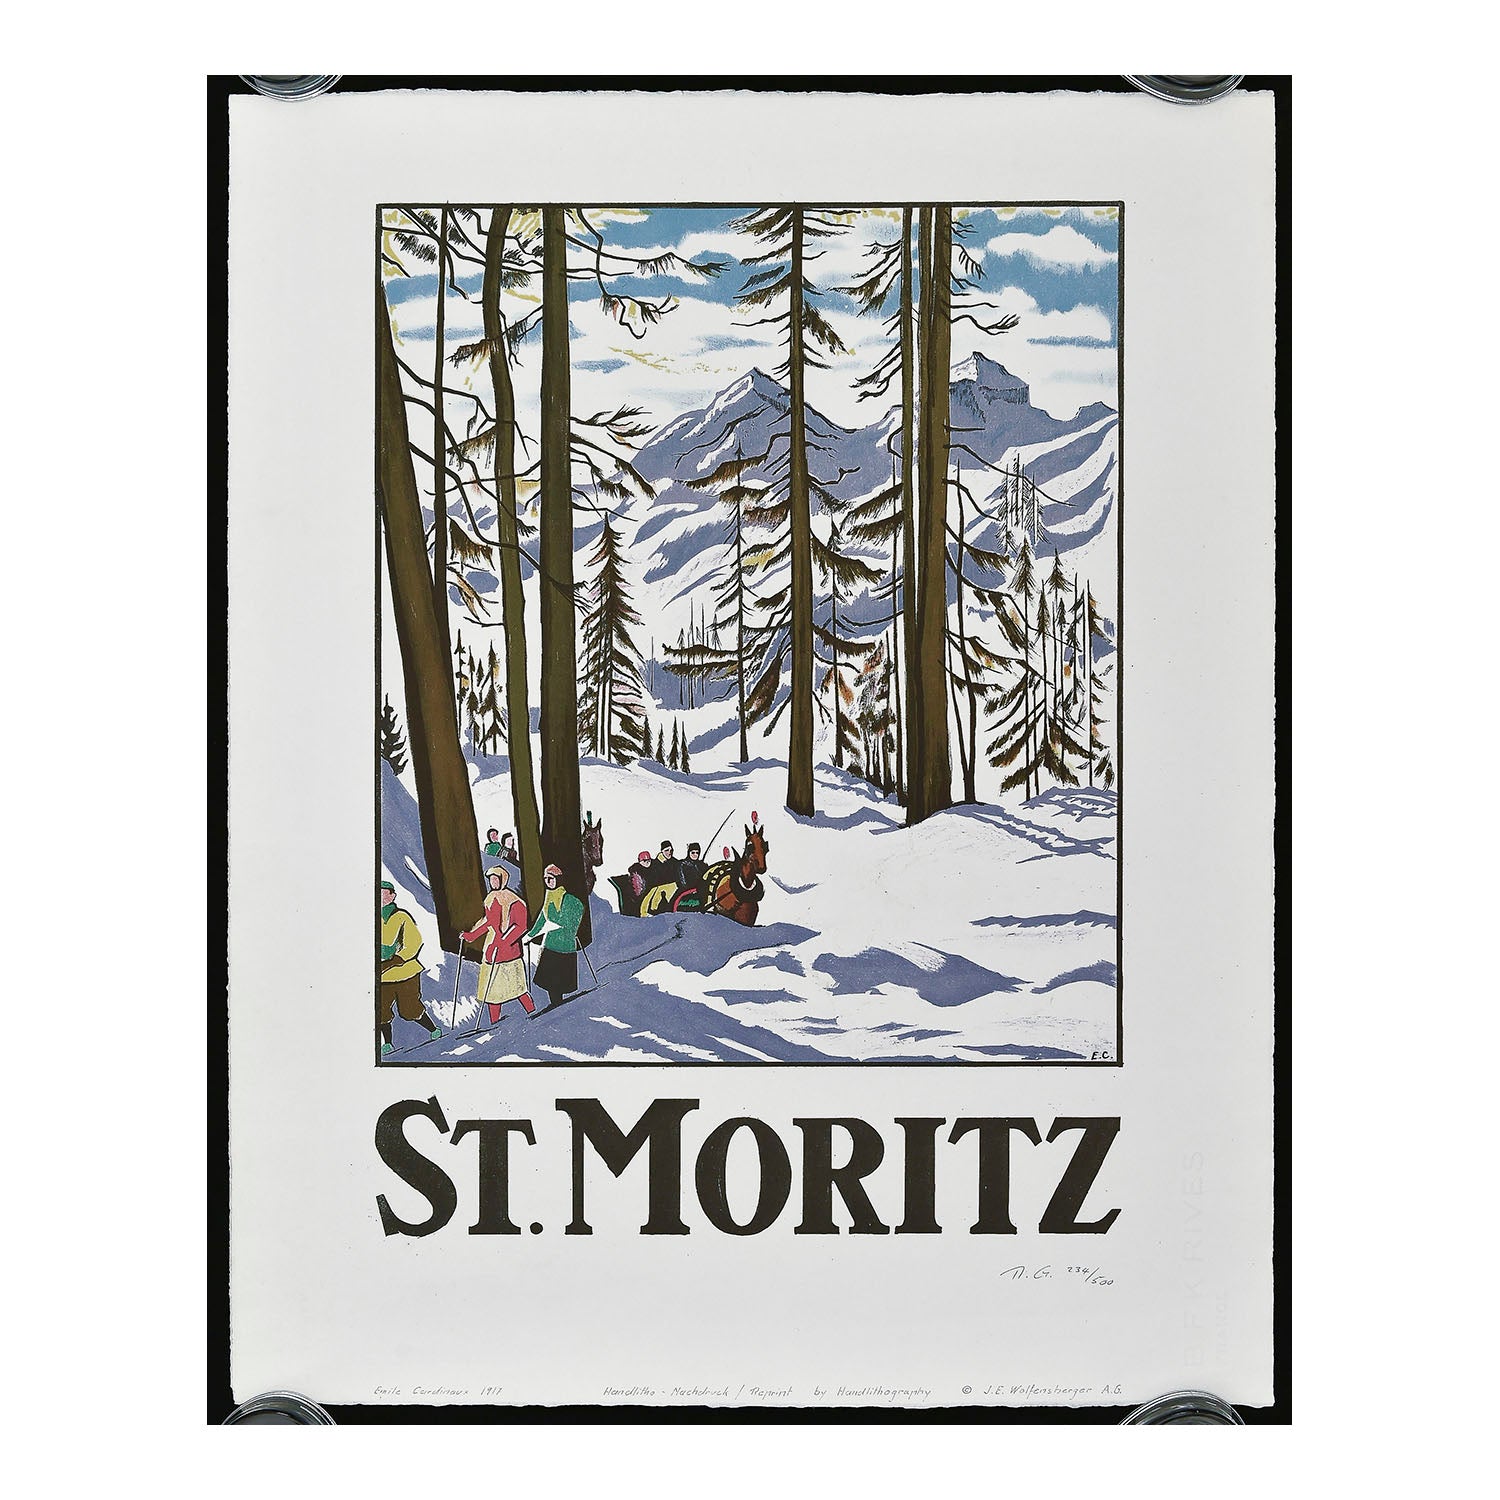 lithographic reprint of St Moritz, by Emil Cardinaux (1877-1936), originally published in 1917. Regarded as a masterpiece of early poster art, the image depicts a group of cross-country skiers accompanied by horse drawn sleighs against a wintry St. Moritz landscape